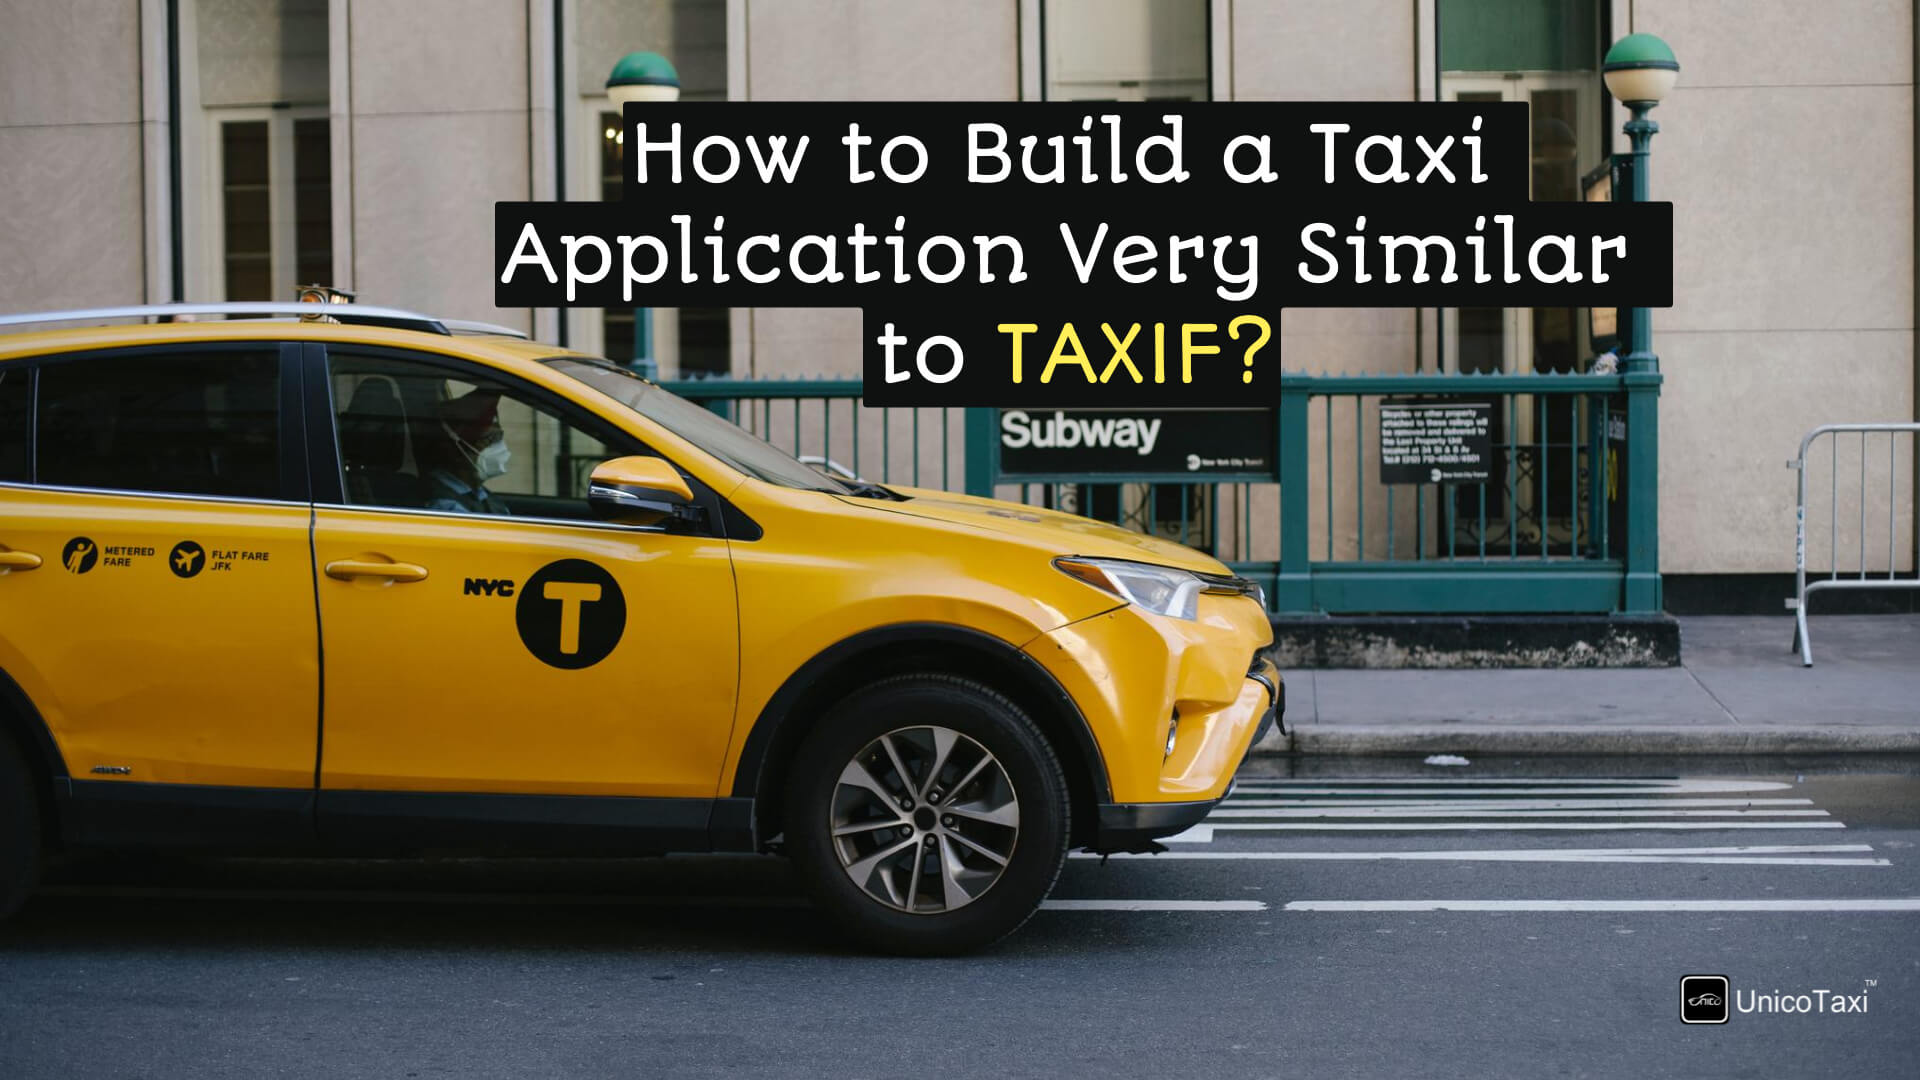 How to Build a Taxi Application Very Similar to TAXIF?